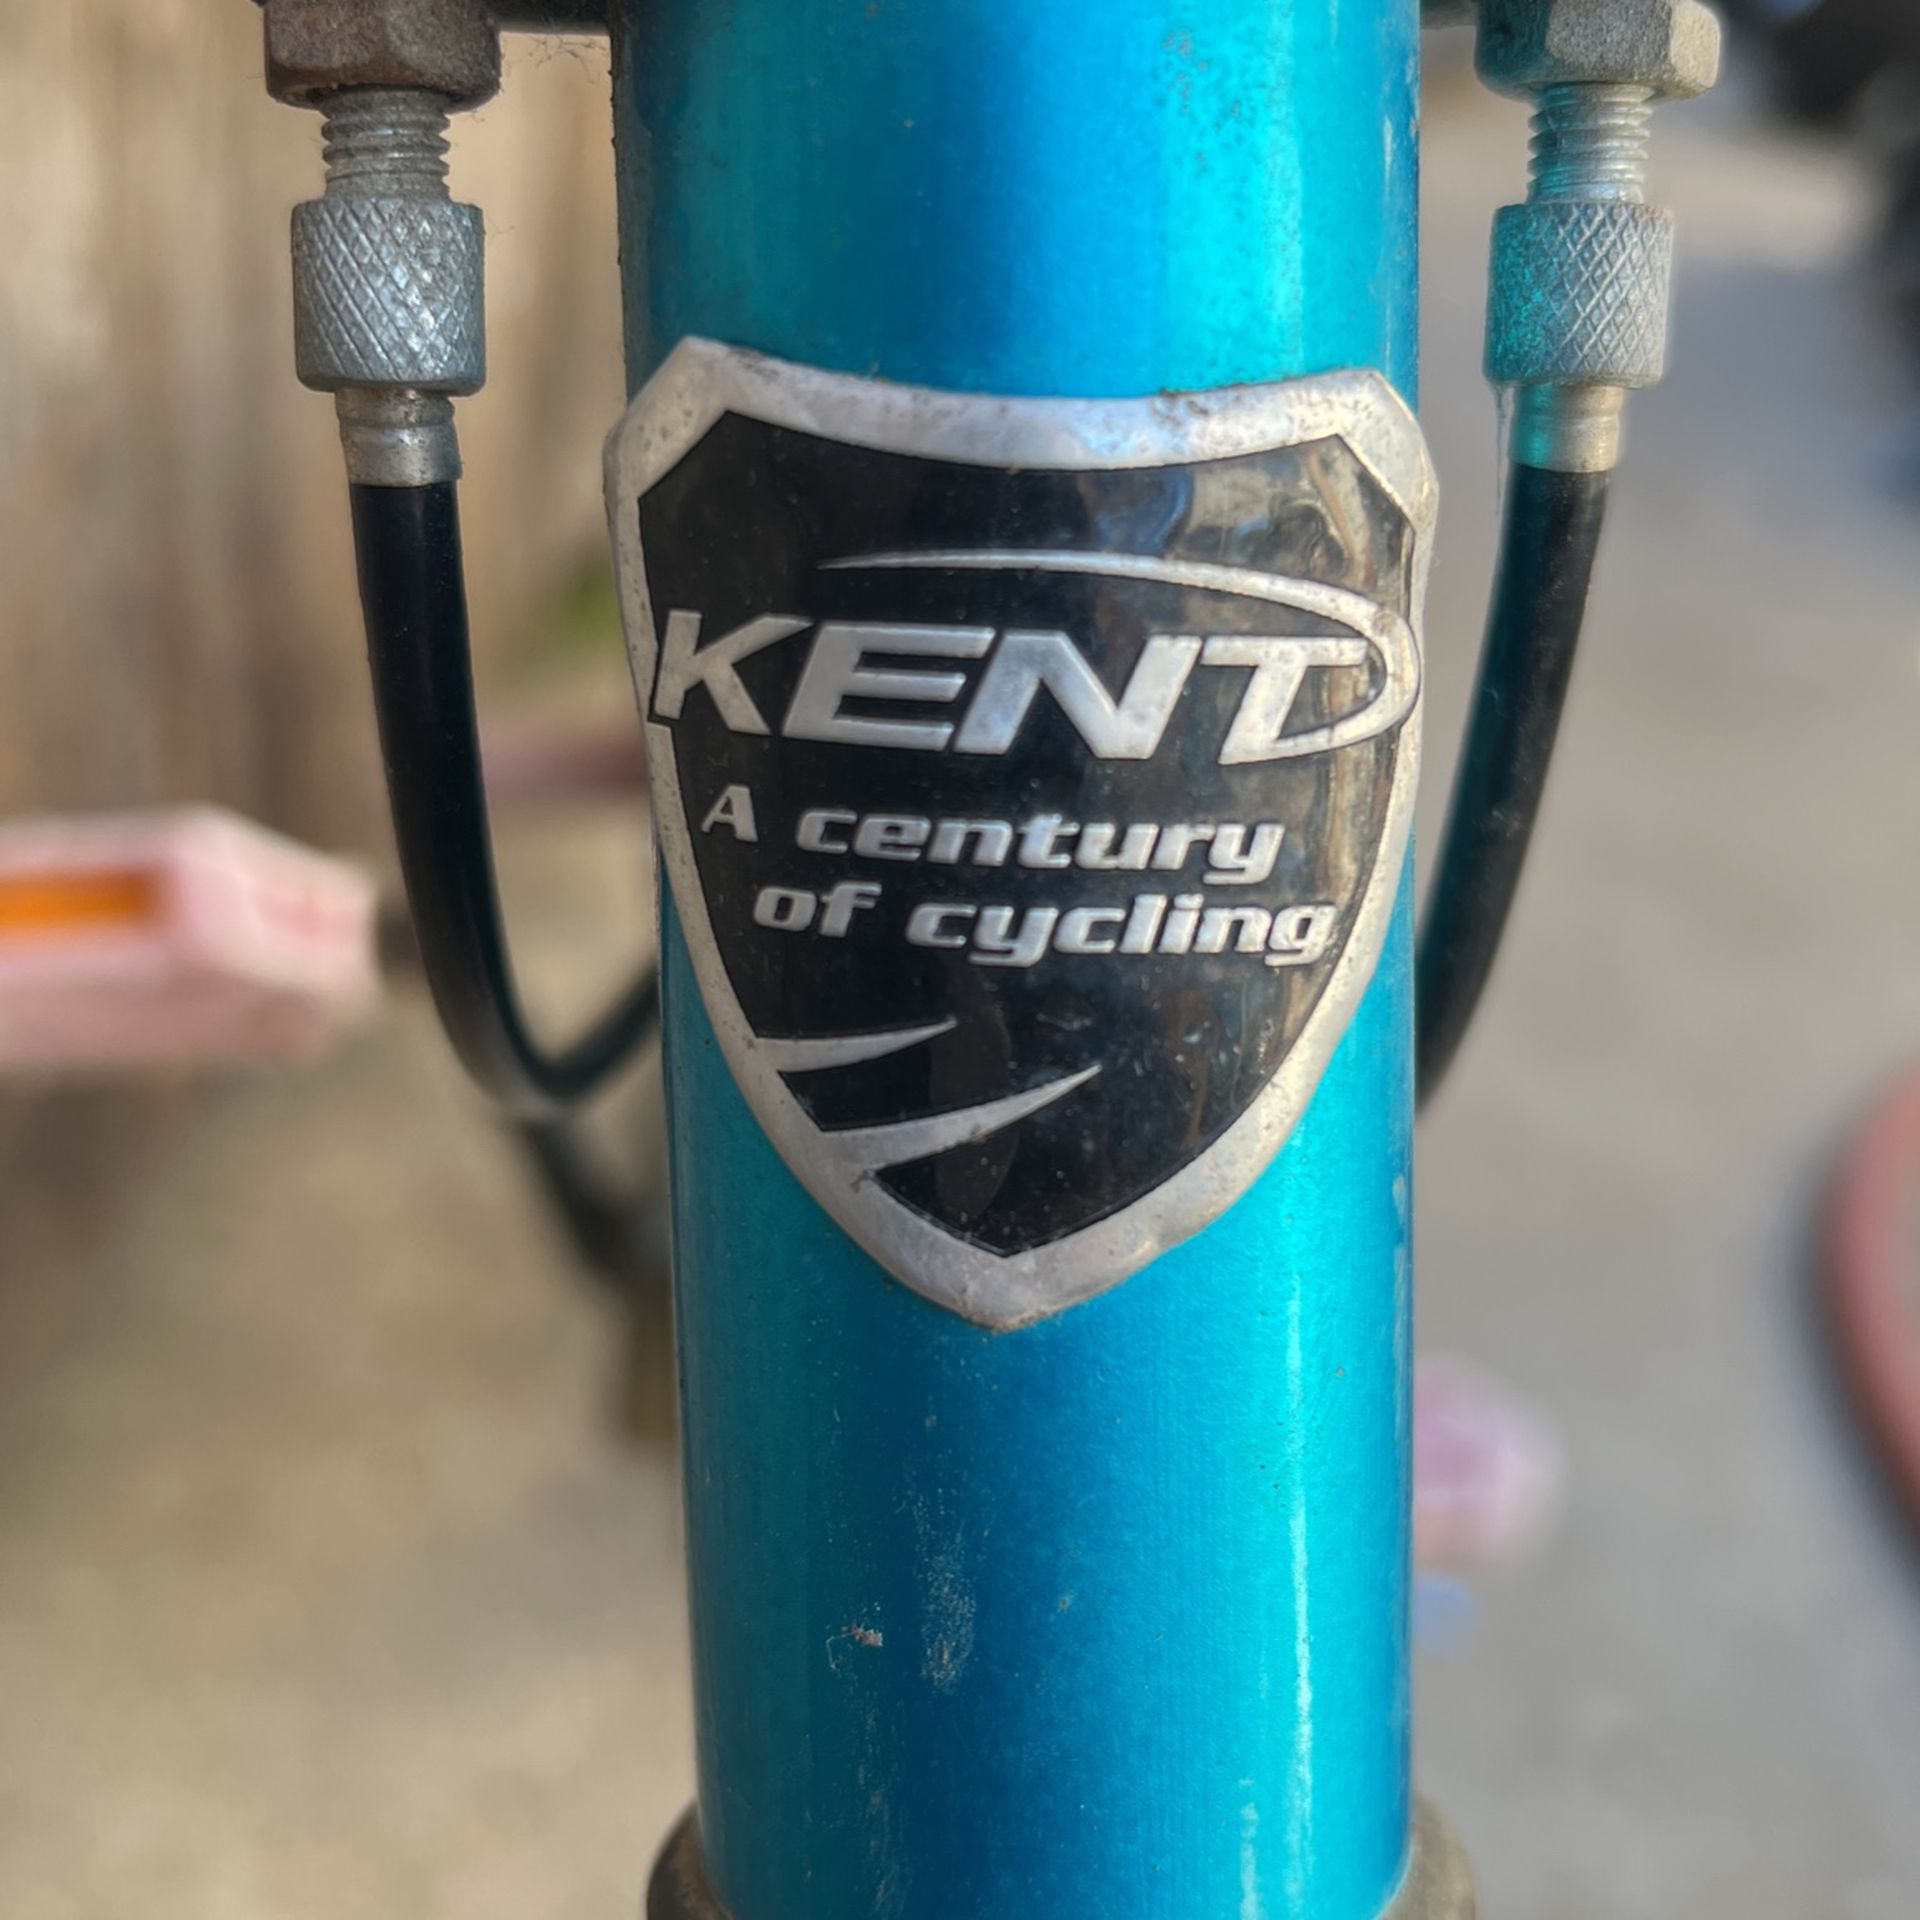 kent a century of cycling kid